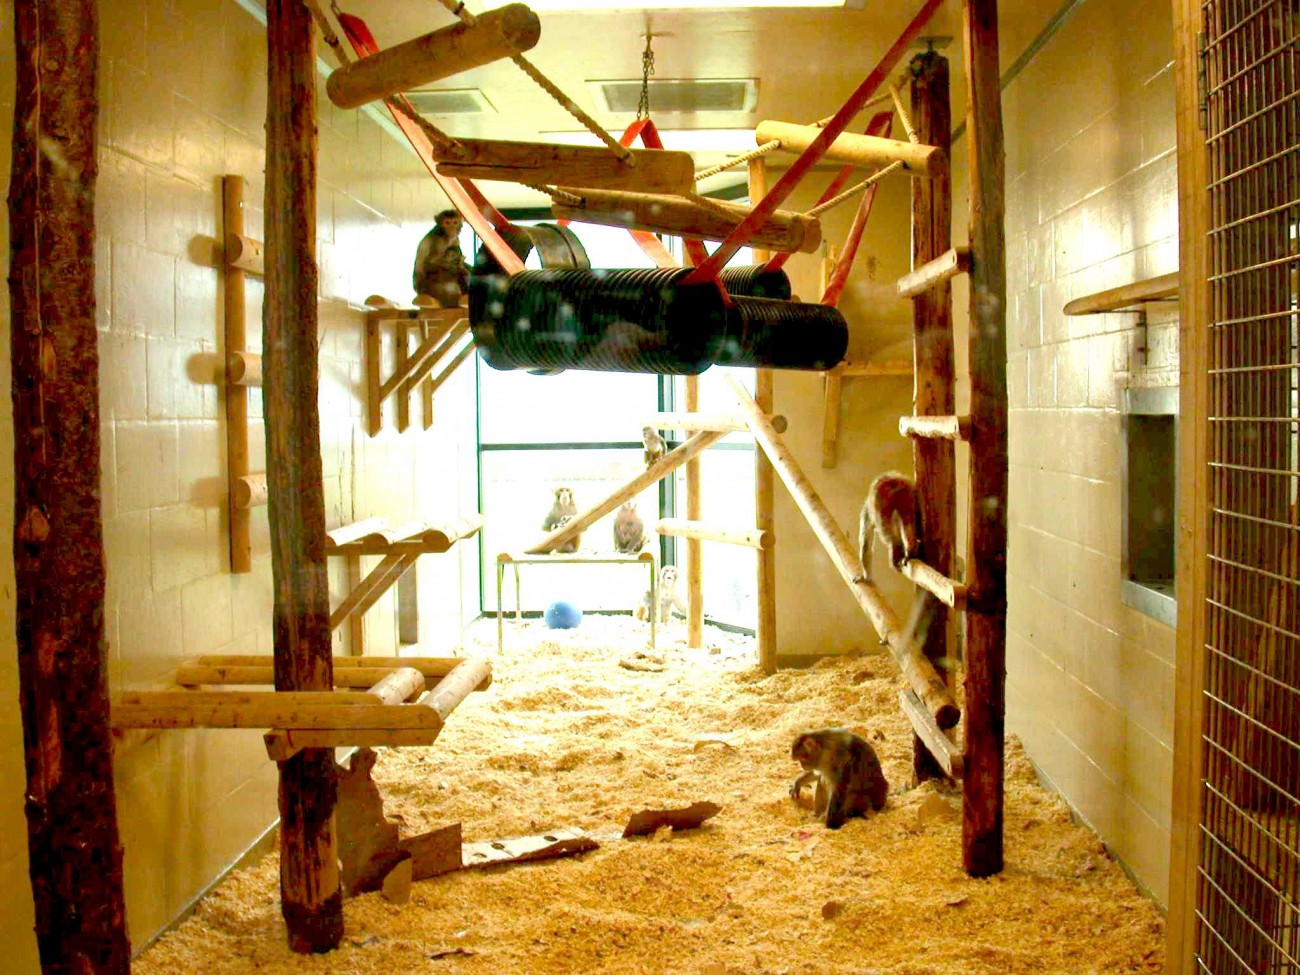 A large room housing a breeding group of rhesus macaques. In the background is a floor-to-ceiling height bay window, letting lots of natural light into the room. The floor is covered in a deep layer of wood shavings, with one monkey on the floor foraging for scattered food. Wooden ladders, platforms and shelves fill the walls and room space, some of which have monkeys resting on them. Suspended from the ceiling are swings made from wood and ropes, and from plastic barrels and firehoses.